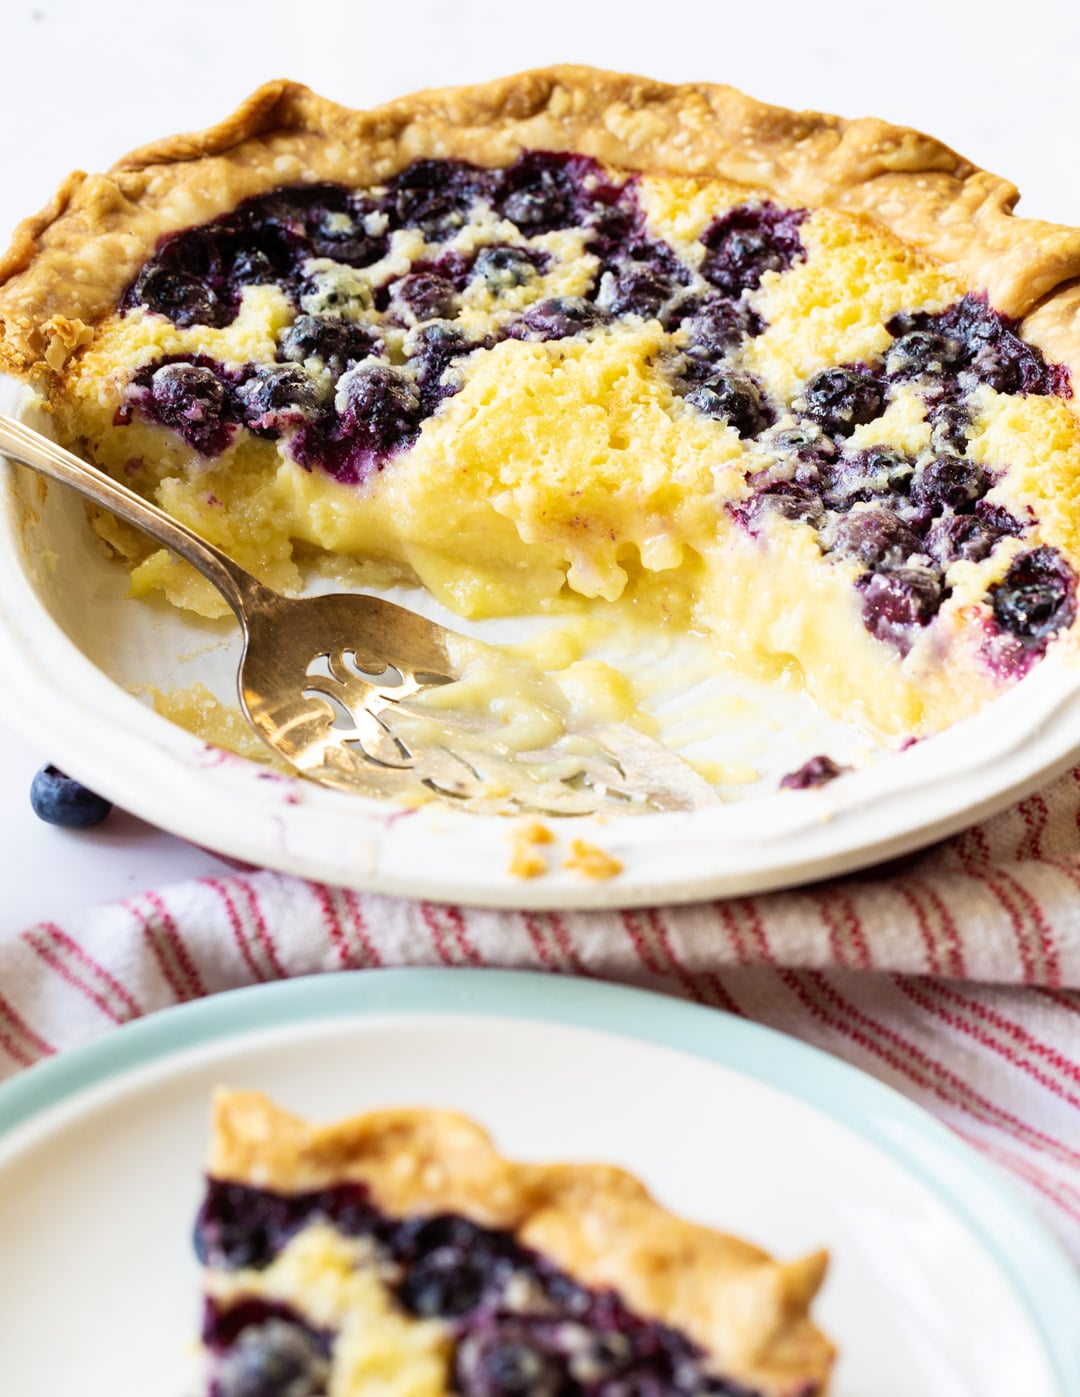 Blueberry Buttermilk Pie with several slices cut away.